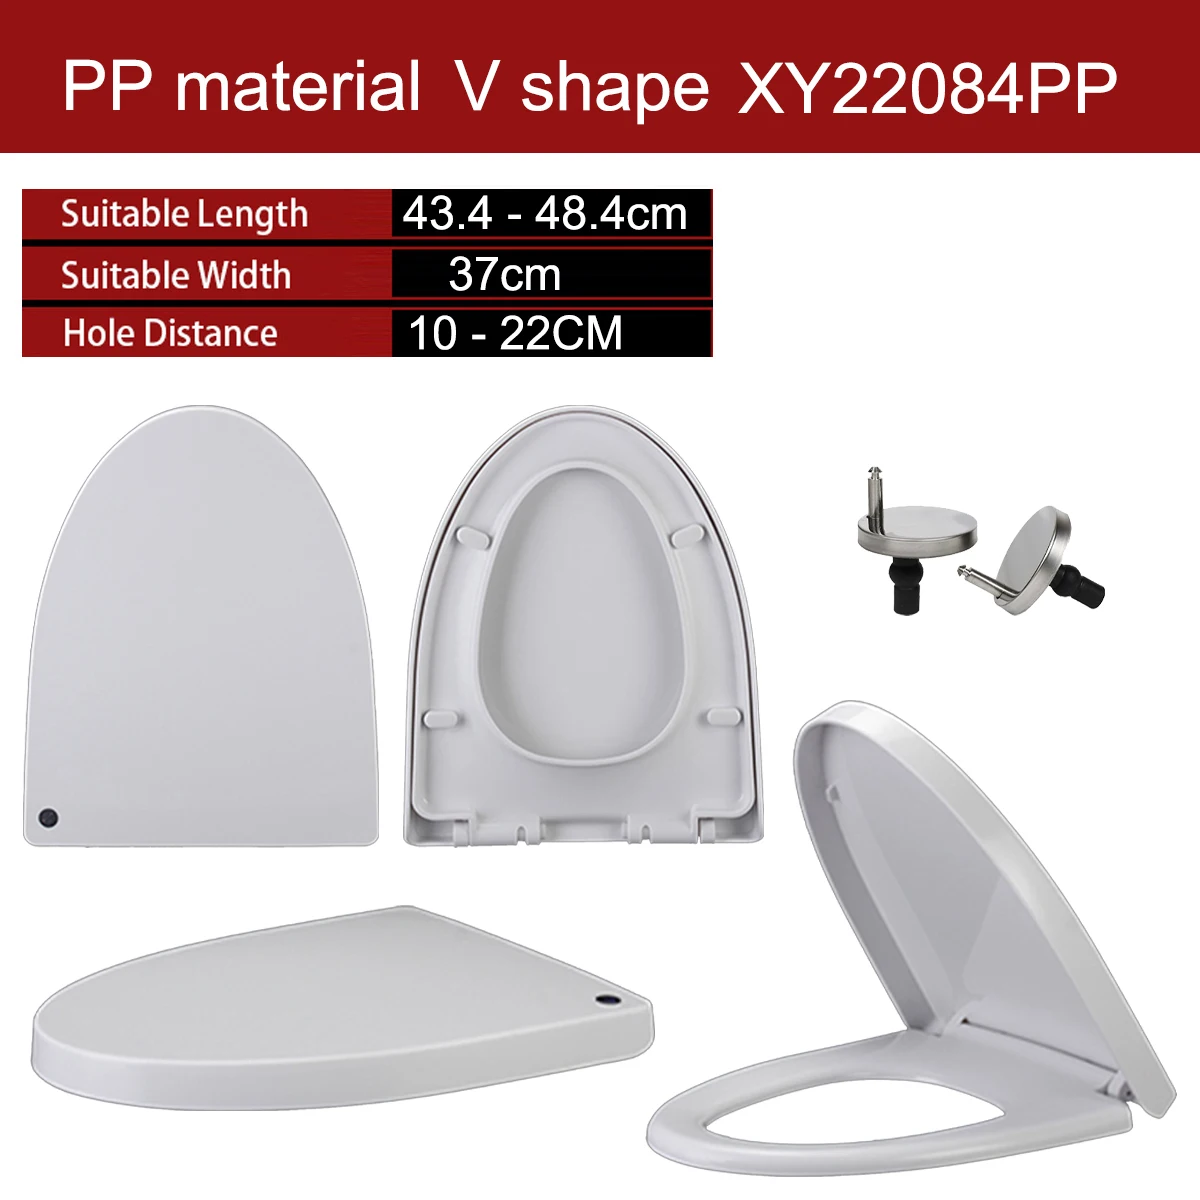 

Universal V Shape Elongated Slow Close WC Toilet Seats Cover Bowl Lid Top Mounted Quick Release PP Board Soft Closure XY22084PP